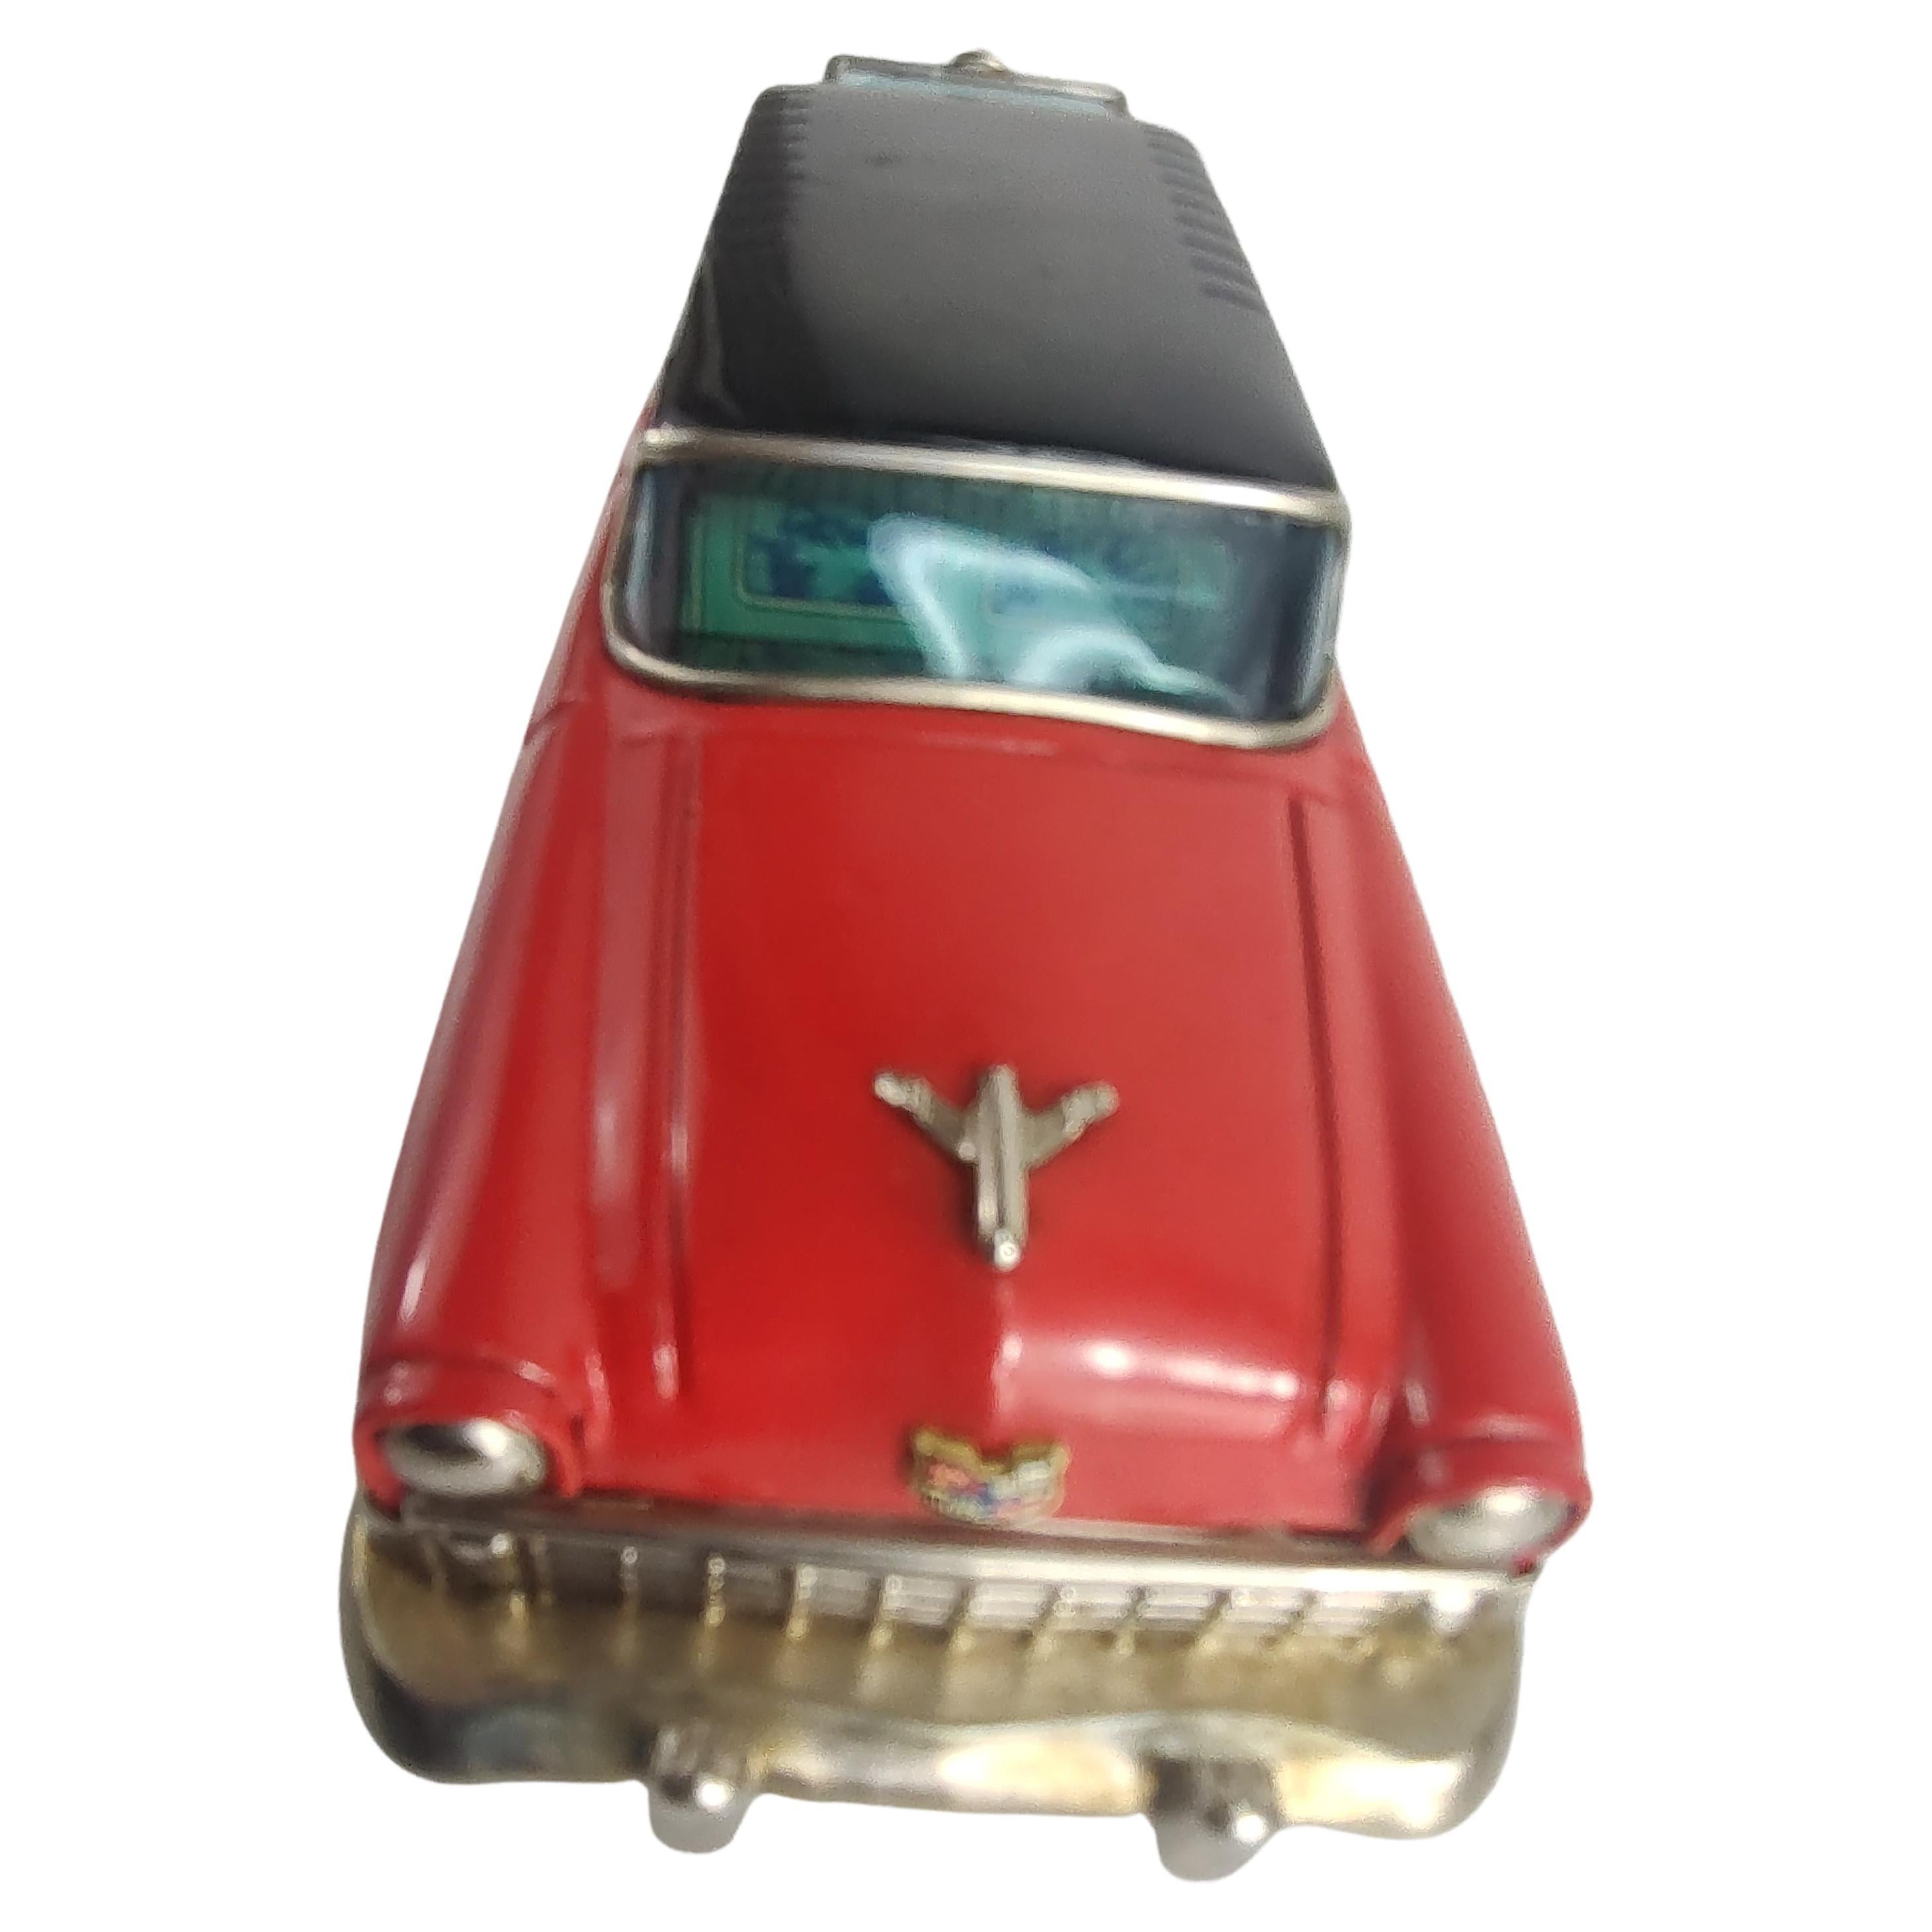 Mid Century Japanese Tin Litho Friction Toy Car Chevrolet Station Wagon C1956 For Sale 2